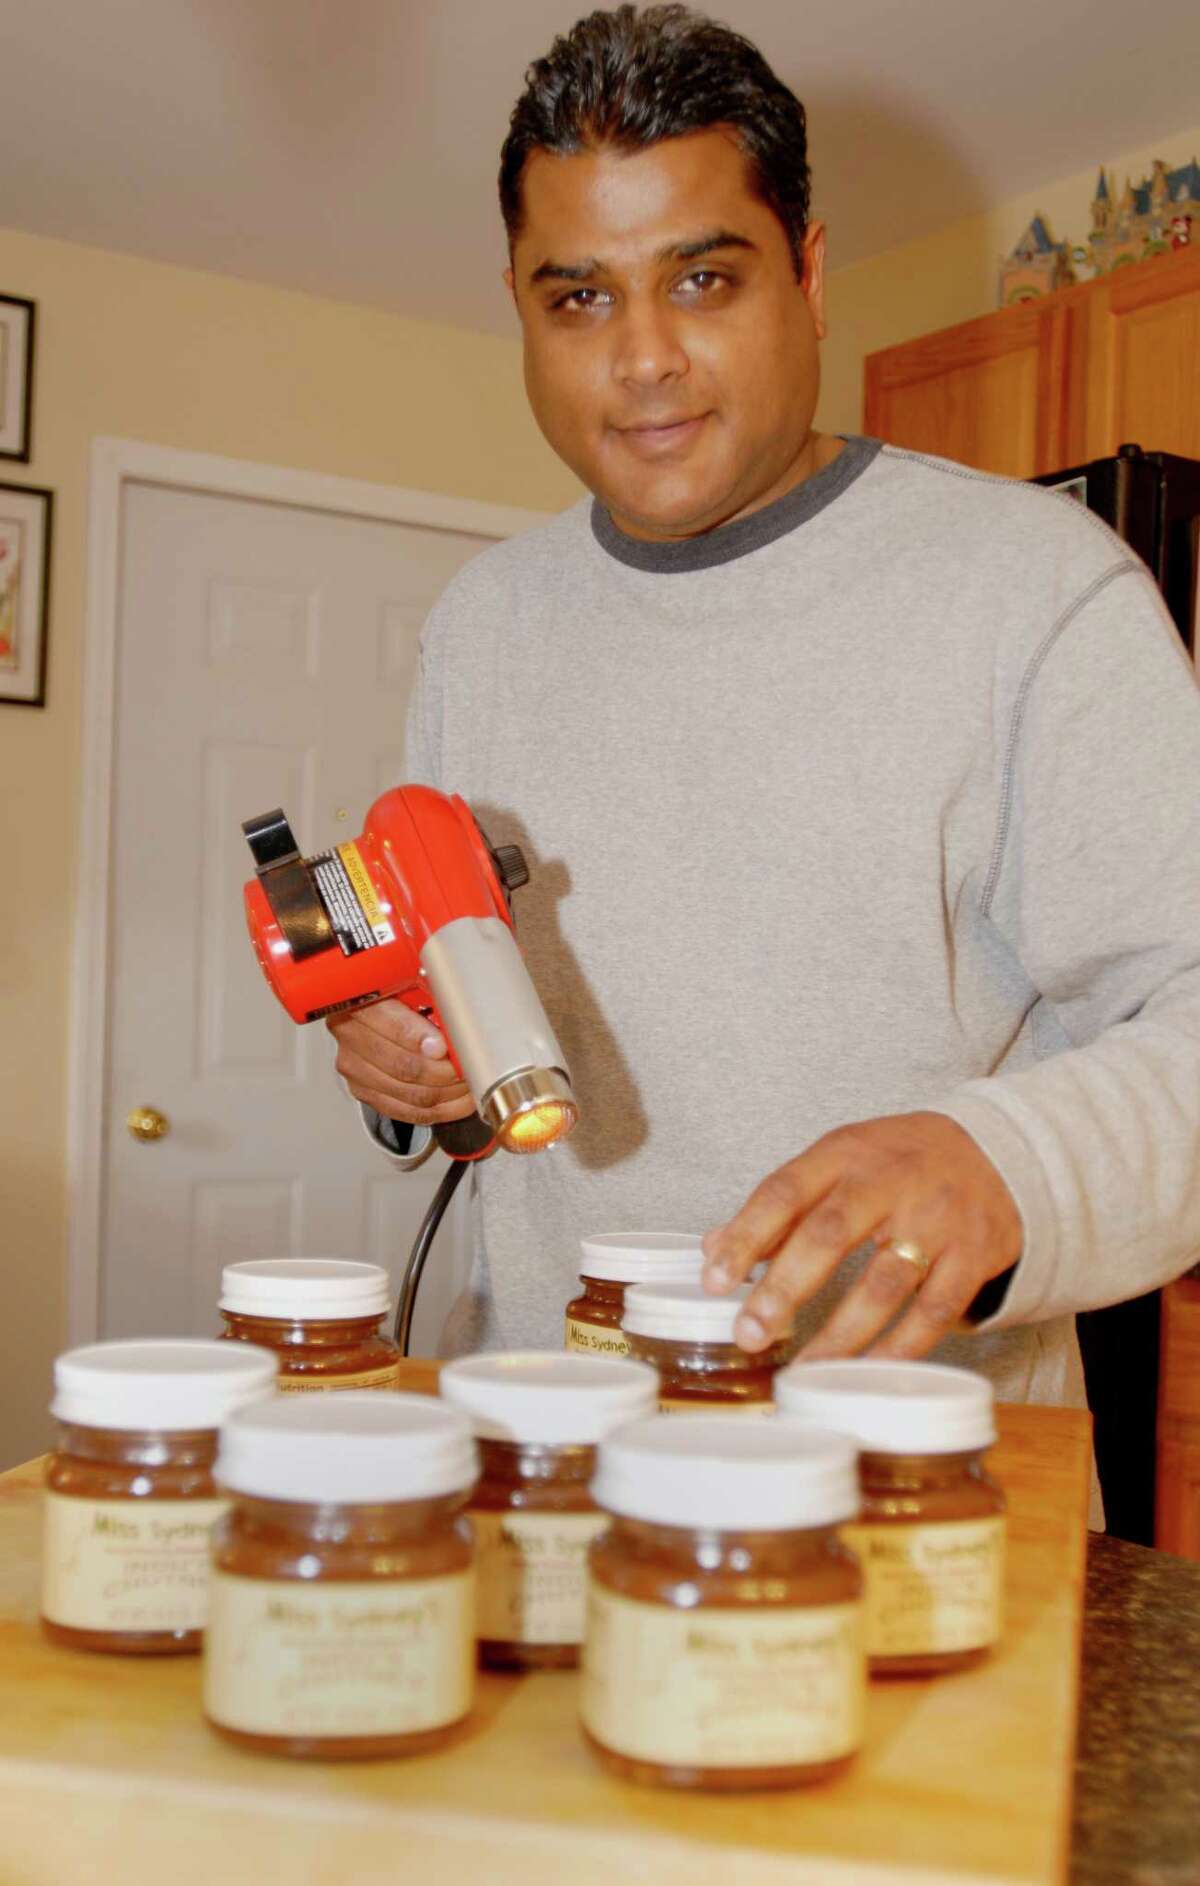 TIMES UNION PHOTO BY: LUANNE M. FERRIS--Monday, Feb. 11, 2008, Feura Bush, NY, Anand "A.J." Jayapal, cq., sealing the jars on some of his family's "Miss Sydney's Chutney, made from Indu's Secret Family Recipe", and their marinade, that they will present at the South Beach Wine and Food Show. The family, who is working together, with Anand's mom's Indian recipe and with help from his wife Shannon's parents, developed the products in their kitchen, and named the Chutney after their seven year old daughter Sydney. They currently produce their tasty condiments at Morrisville College, and are building a test kitchen at their home where they will assume production. Photos for a Feature centerpiece for a Food Centerpiece to package with Jenn Gish Story.